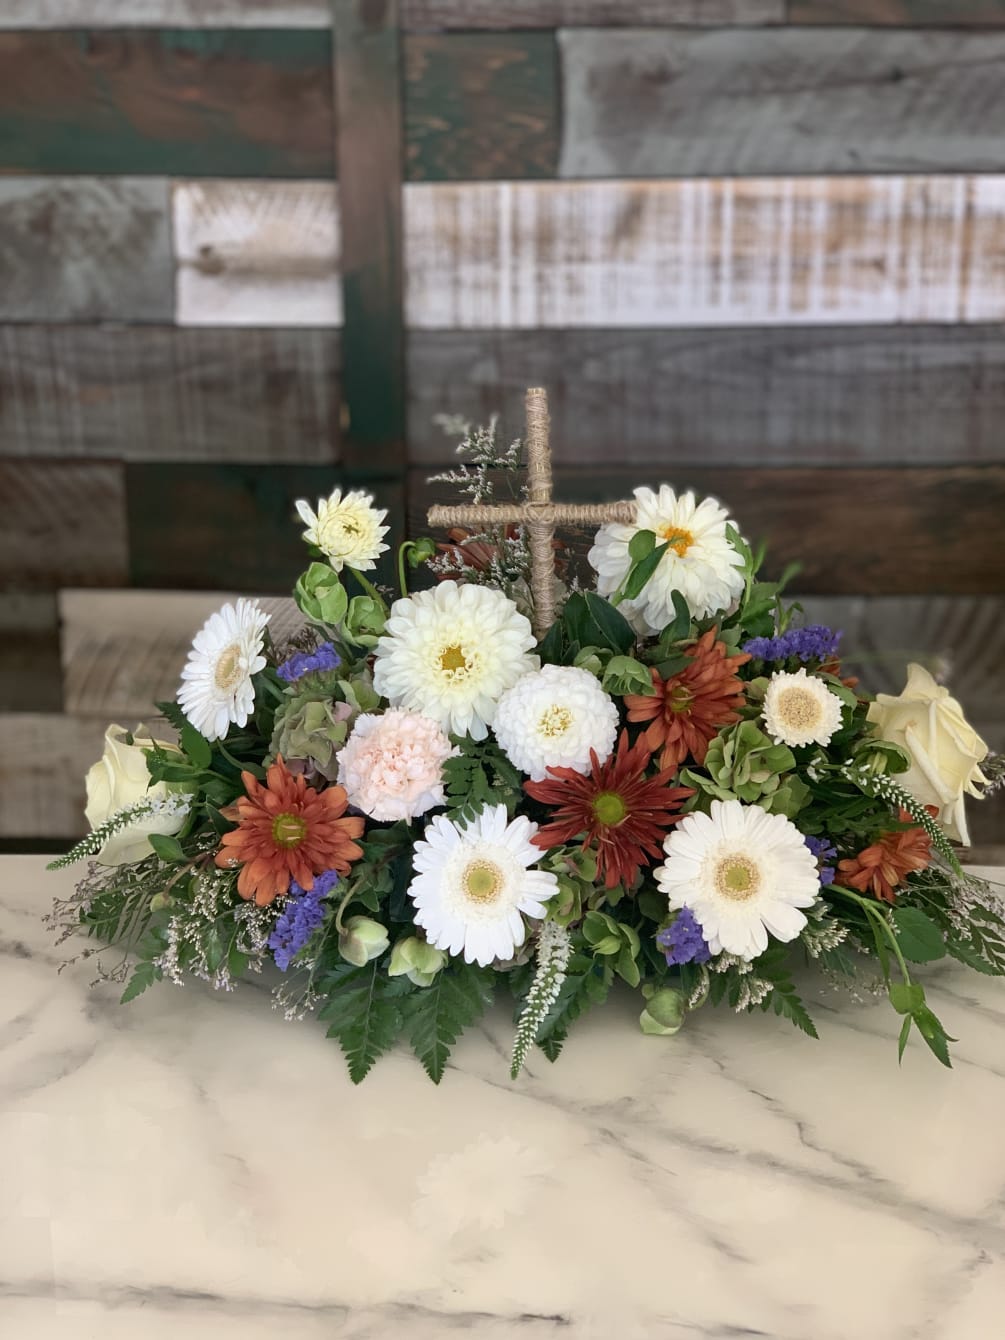 Cross with surrounding seasonal florals for sympathy and condolence.